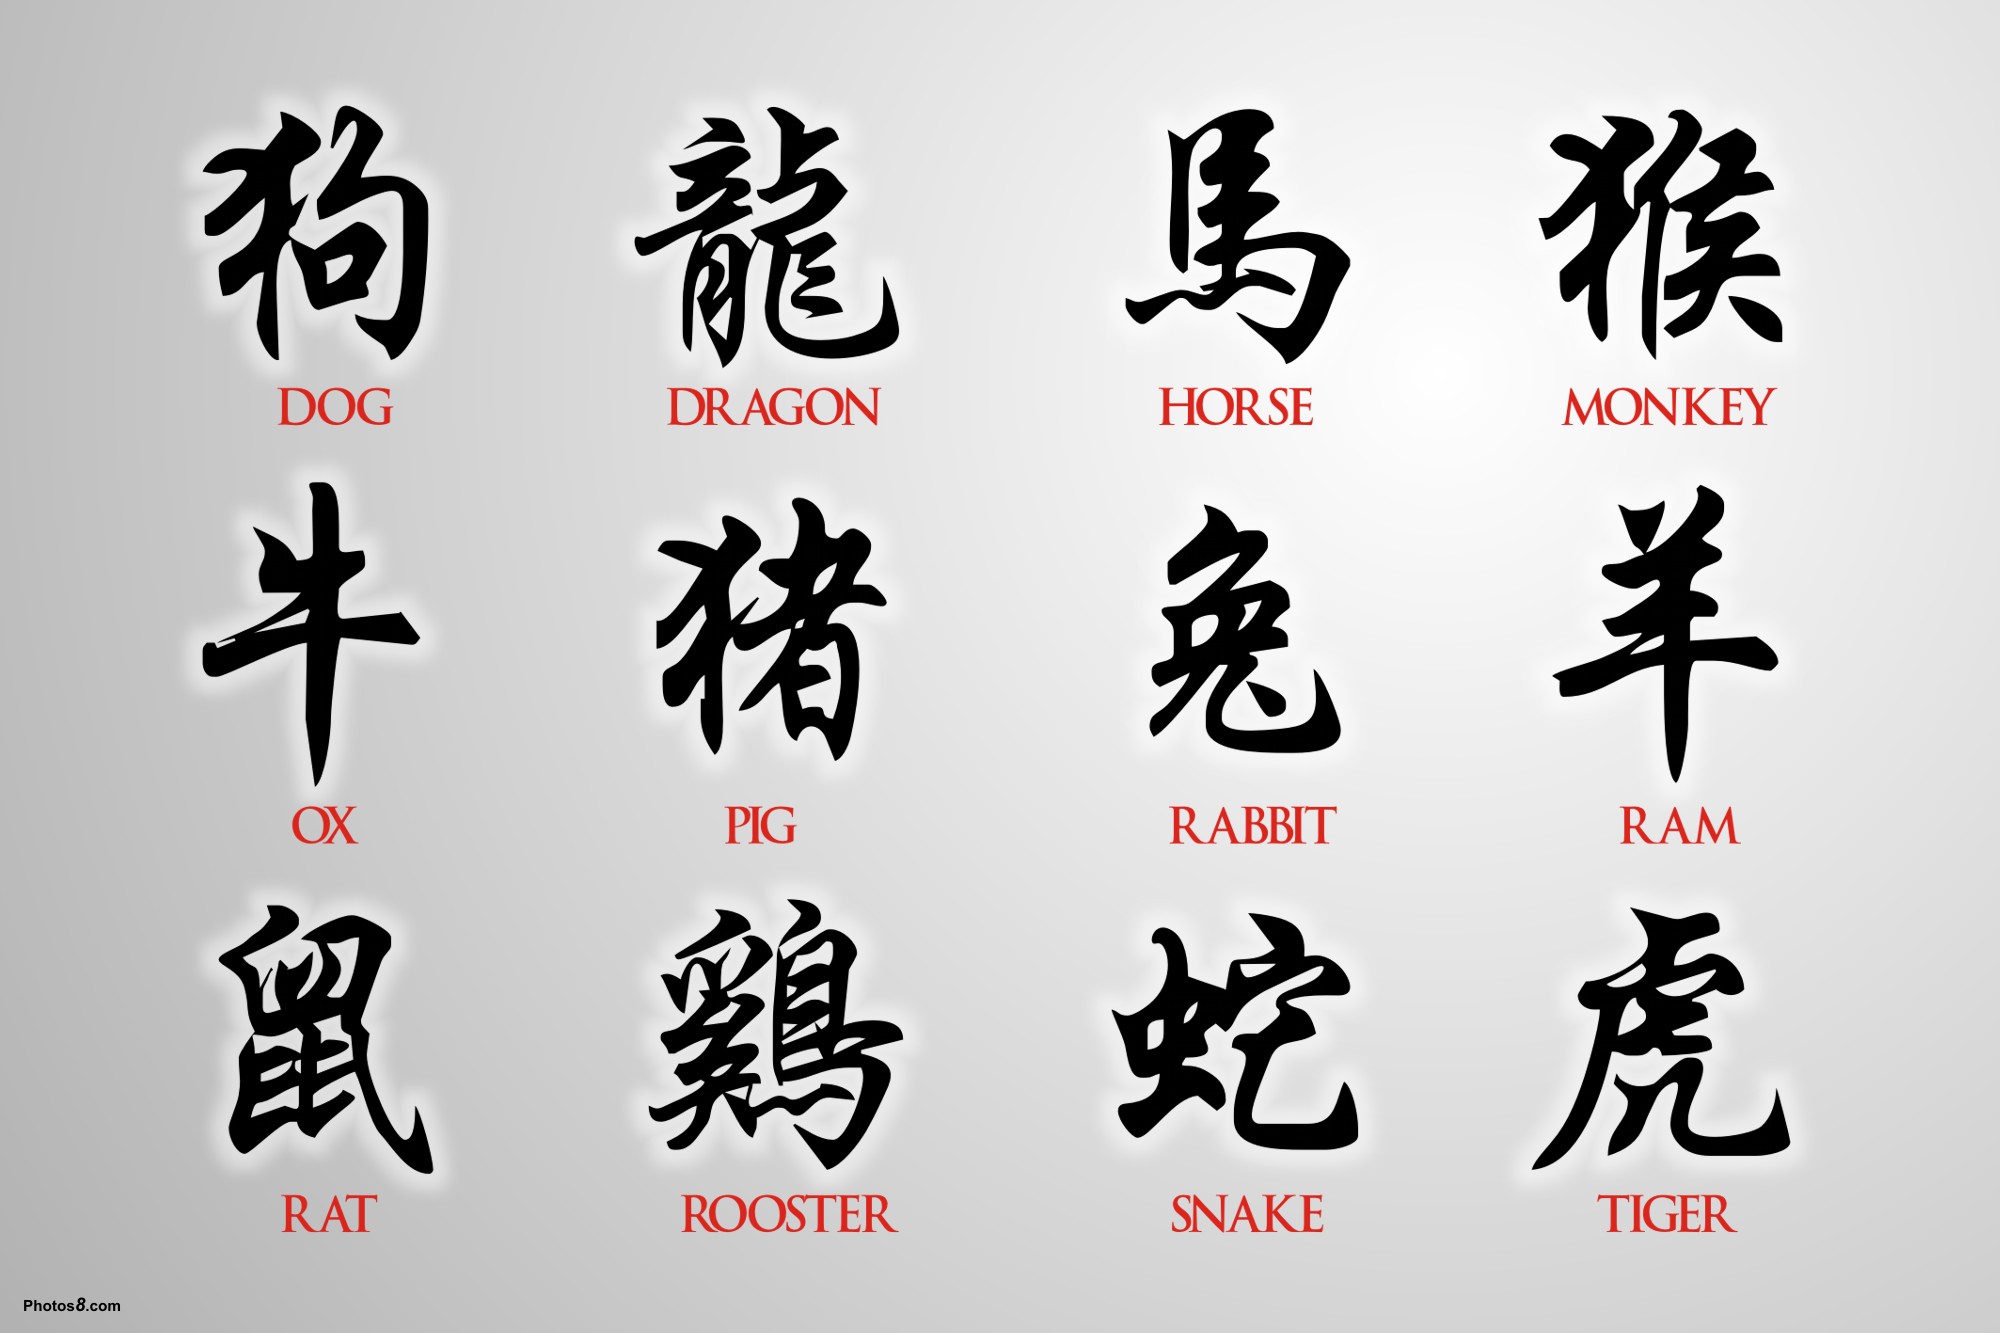 Chinese Zodiac Images Crazy Gallery